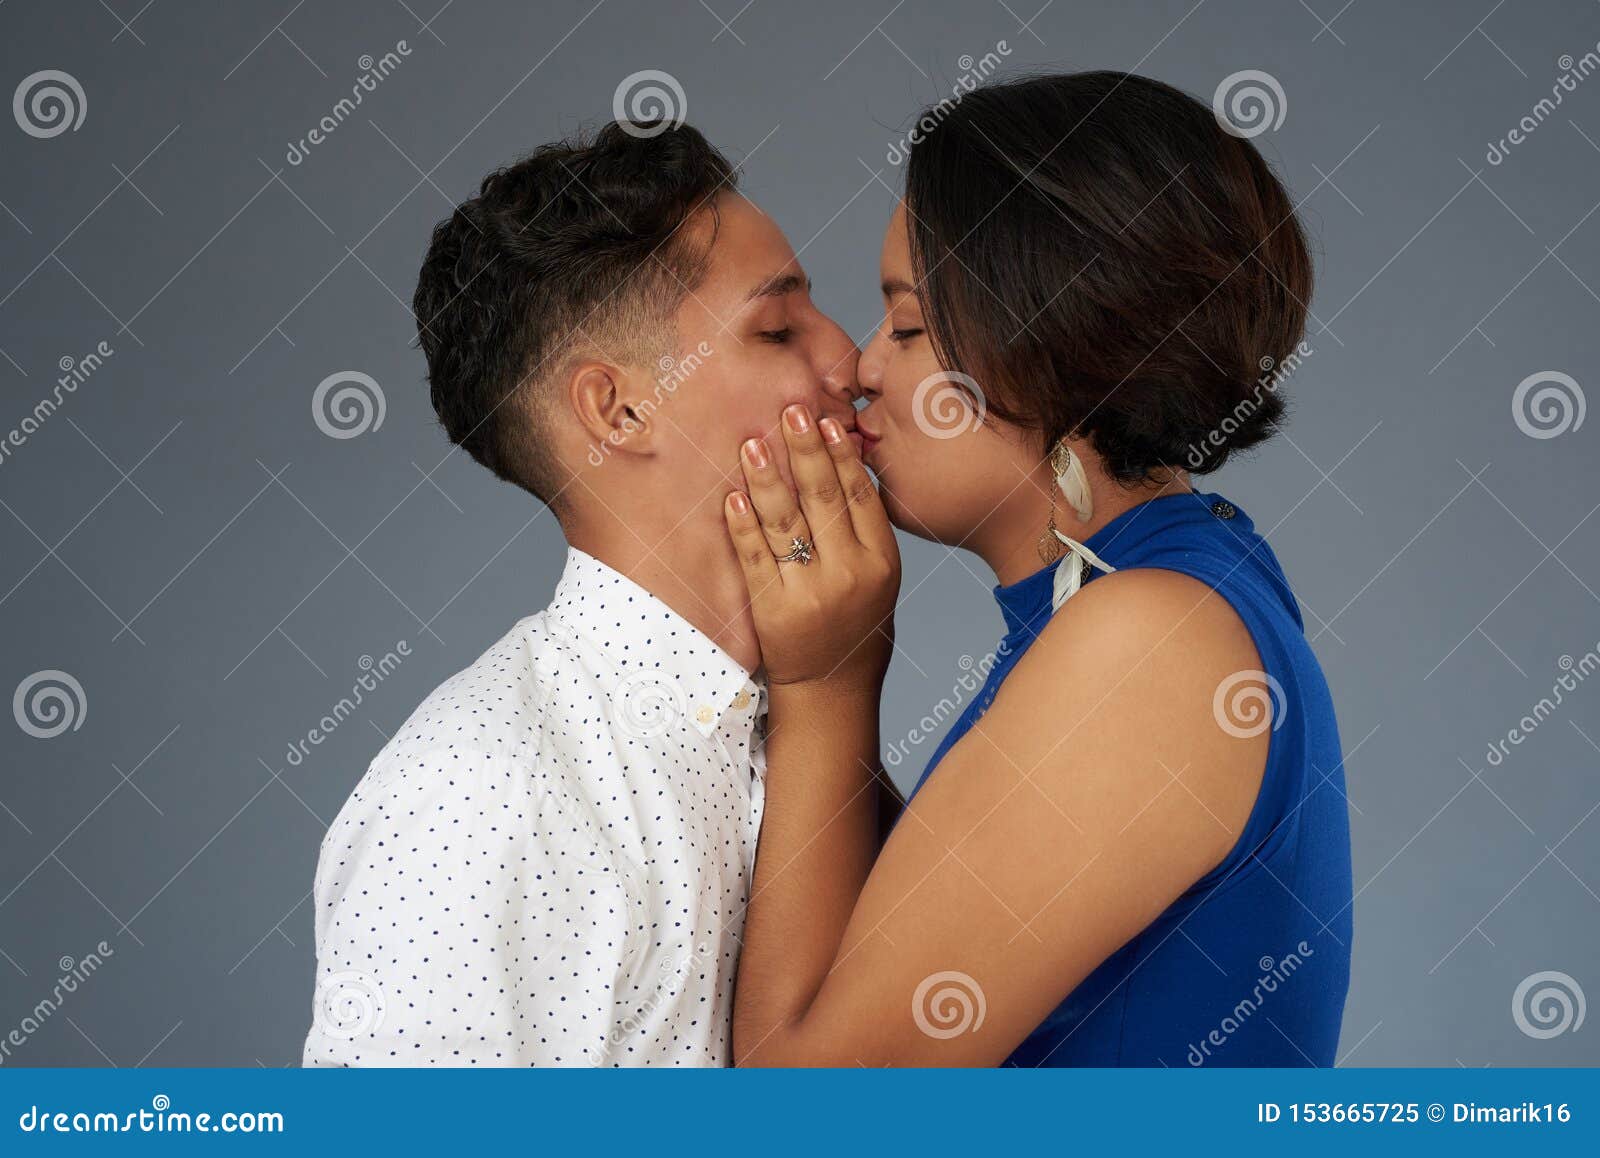 Kiss of young people stock image. Image of kissing, happiness - 153665725